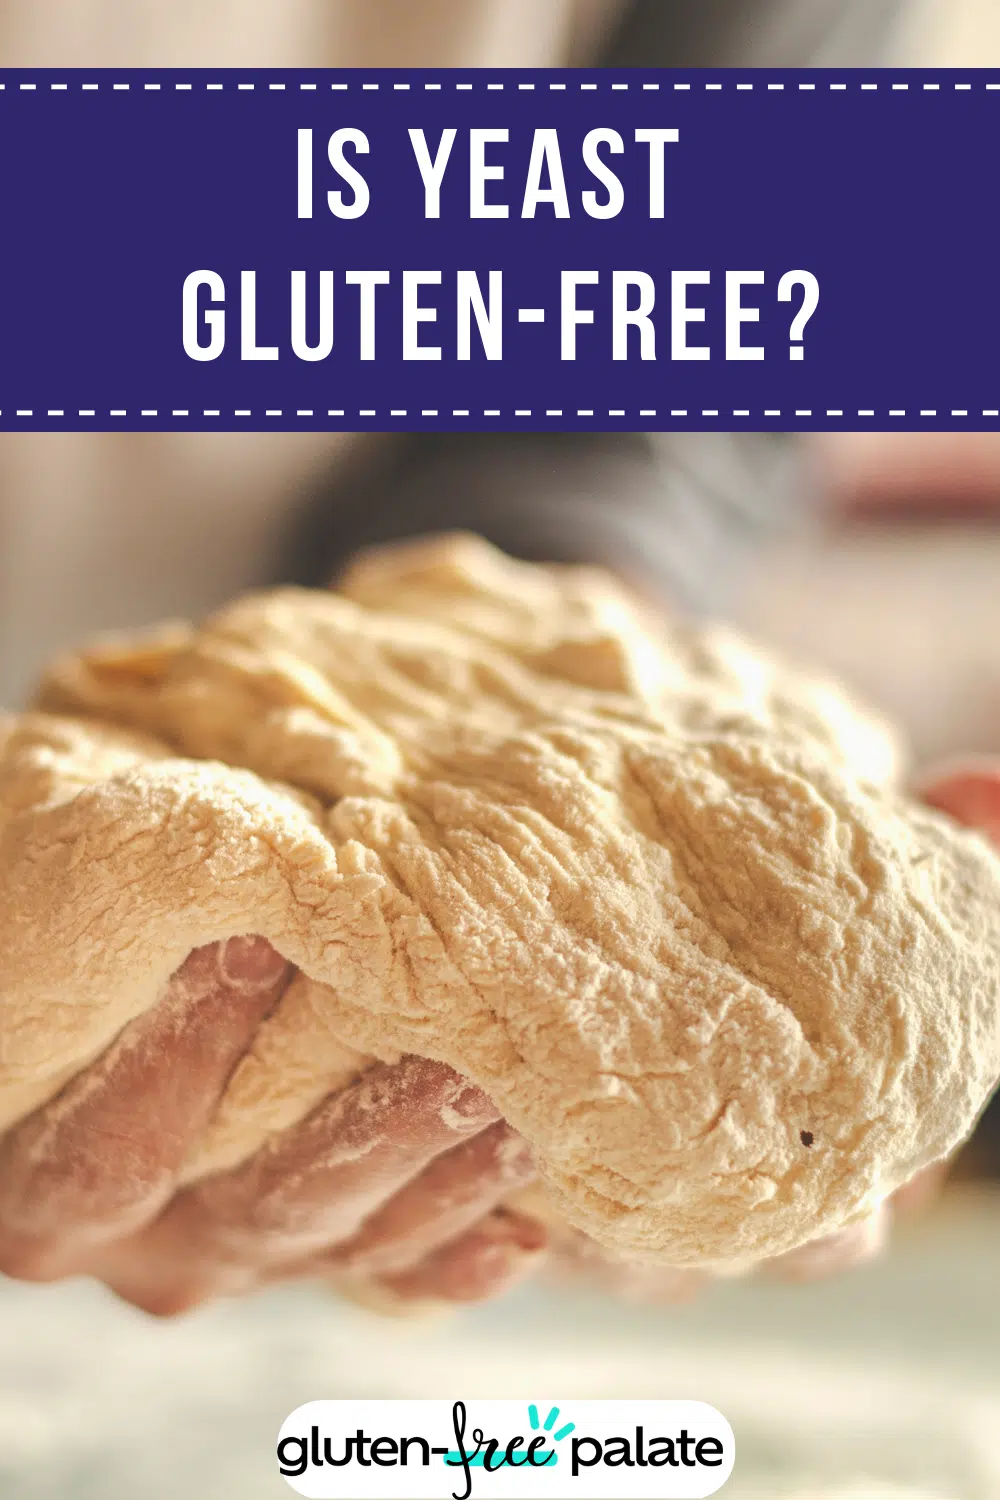 Is Yeast Gluten-Free? It Depends on the Type